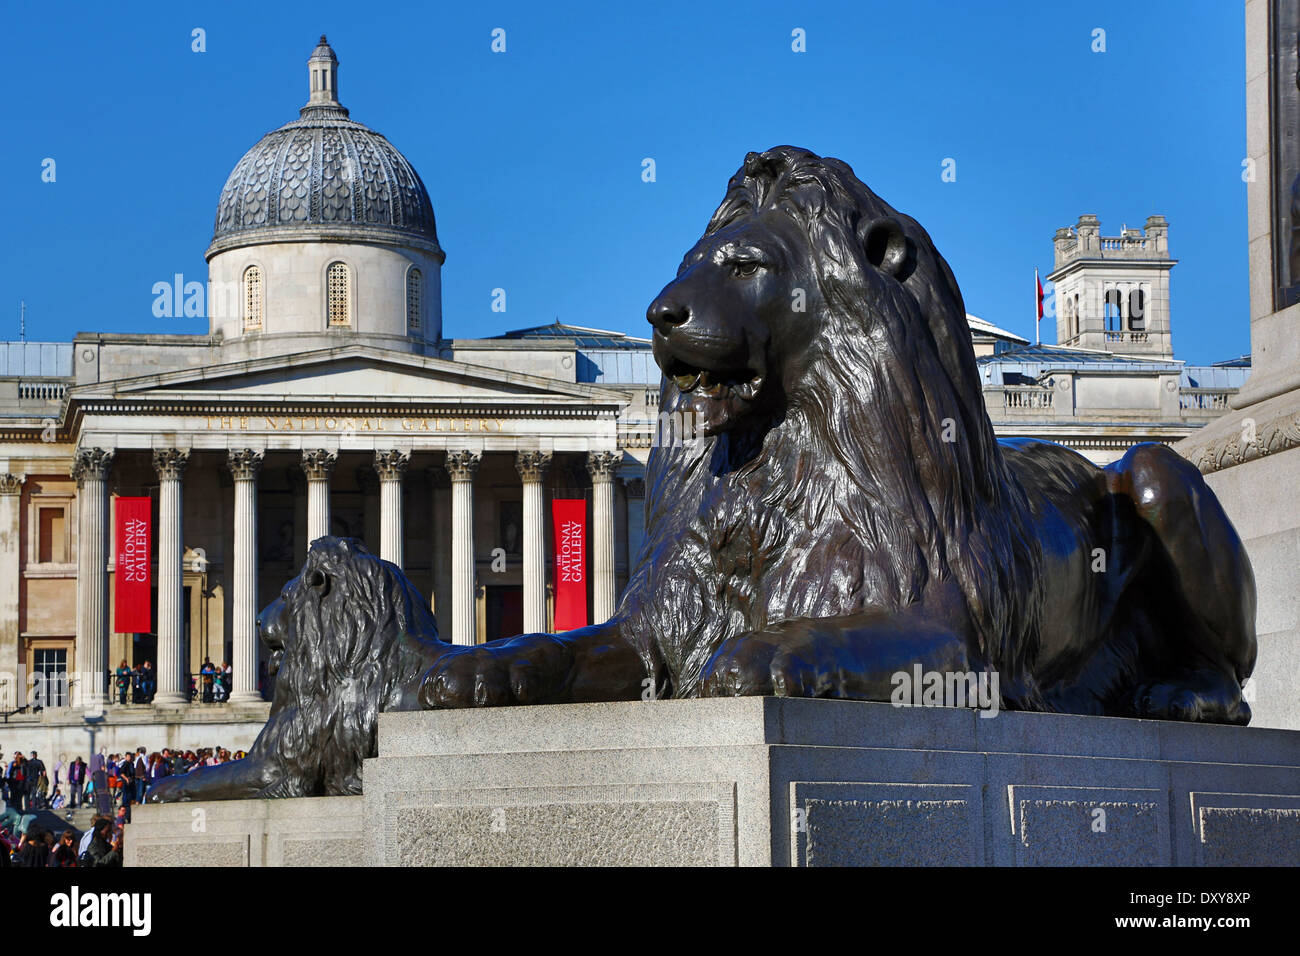 Statue of lion by Landseer beneath Nelson's Column and the National Gallery in Trafalgar Square, London, England Stock Photo